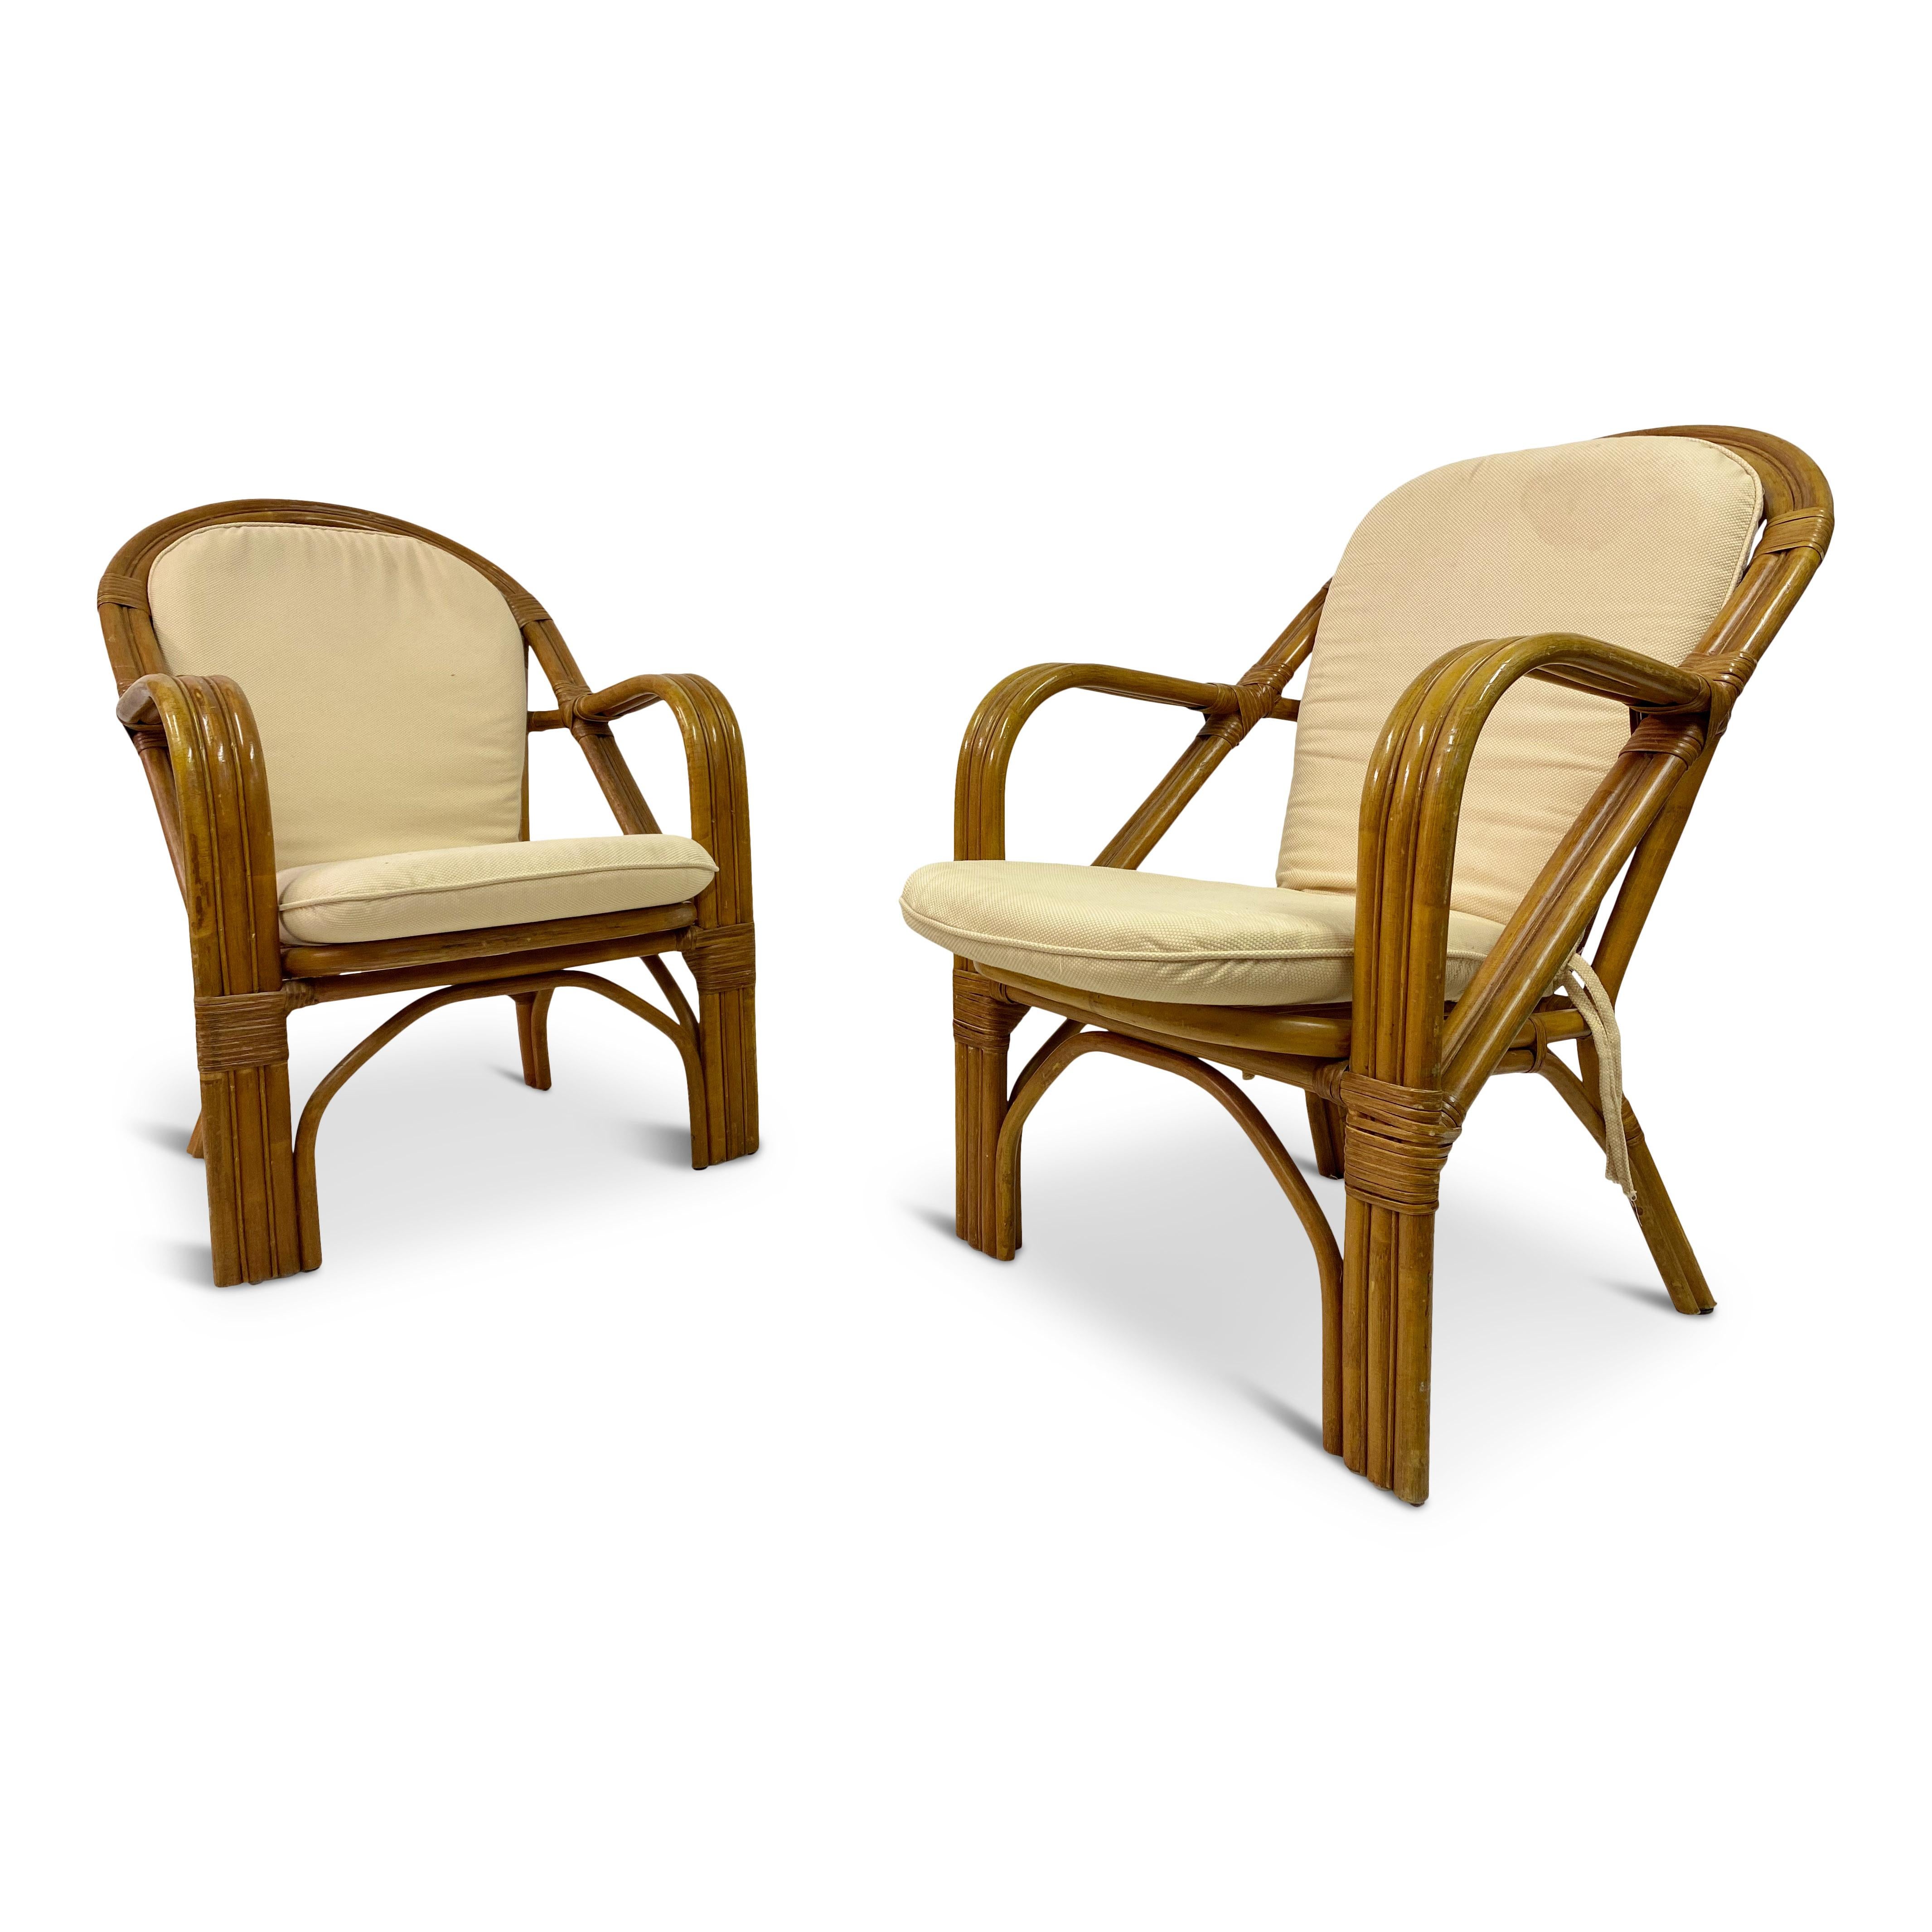 Pair of armchairs

Bamboo

Cushions probably need reupholstery/replacing

Italy 1970s